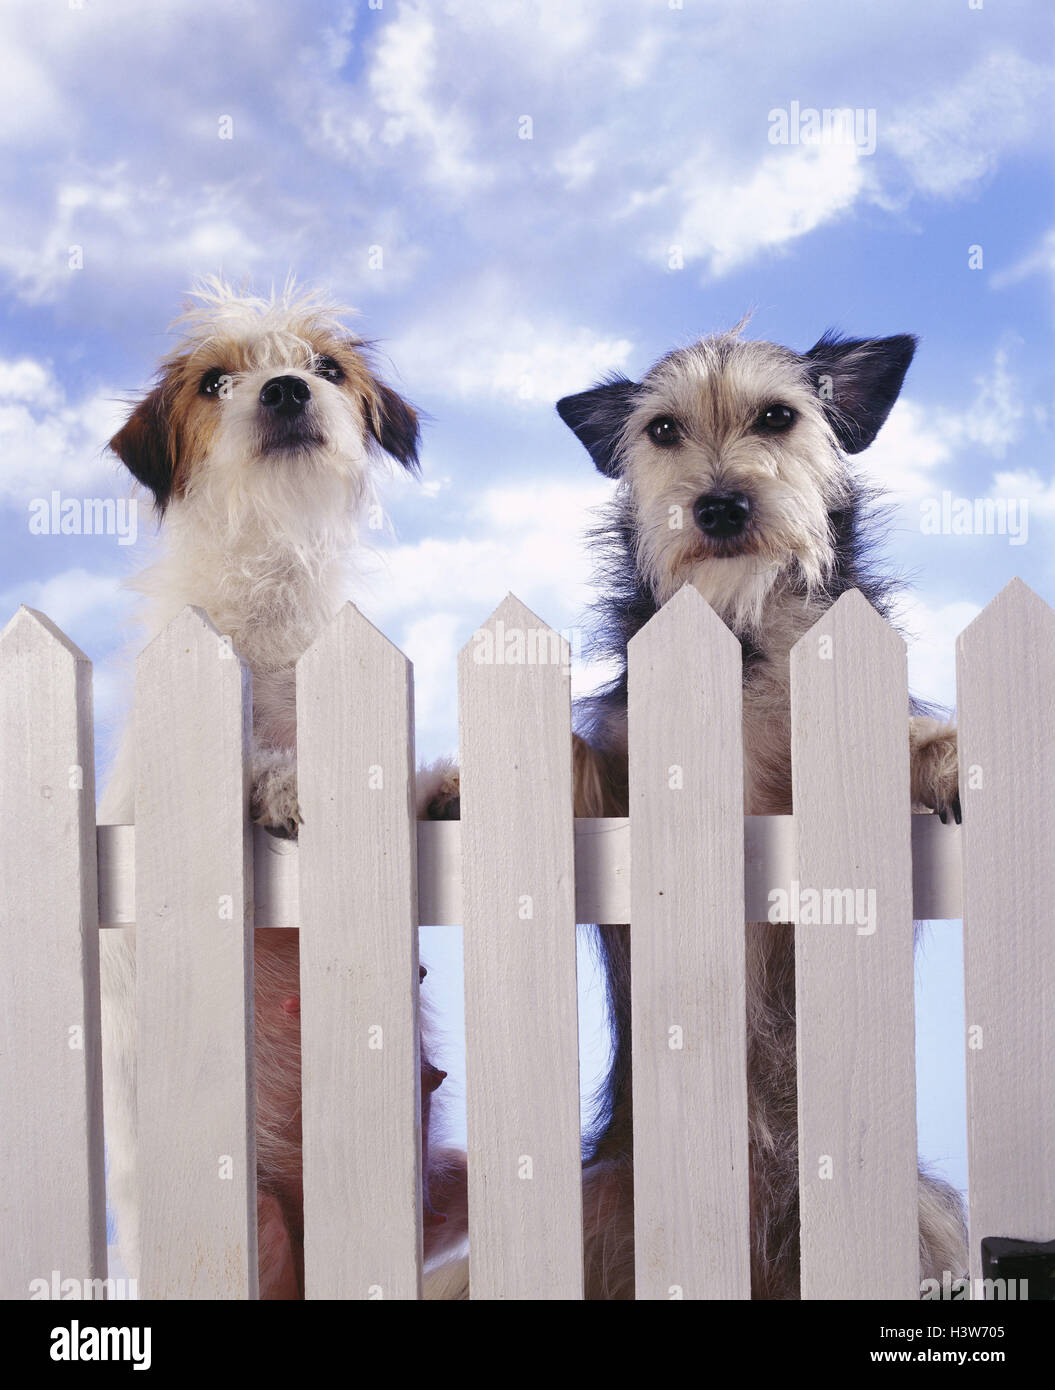 Dogs, garden fence, [M], mammals, Canidae, pets, hybrid dogs, hybrids, two, raise, fence, cloudy sky, near Stock Photo